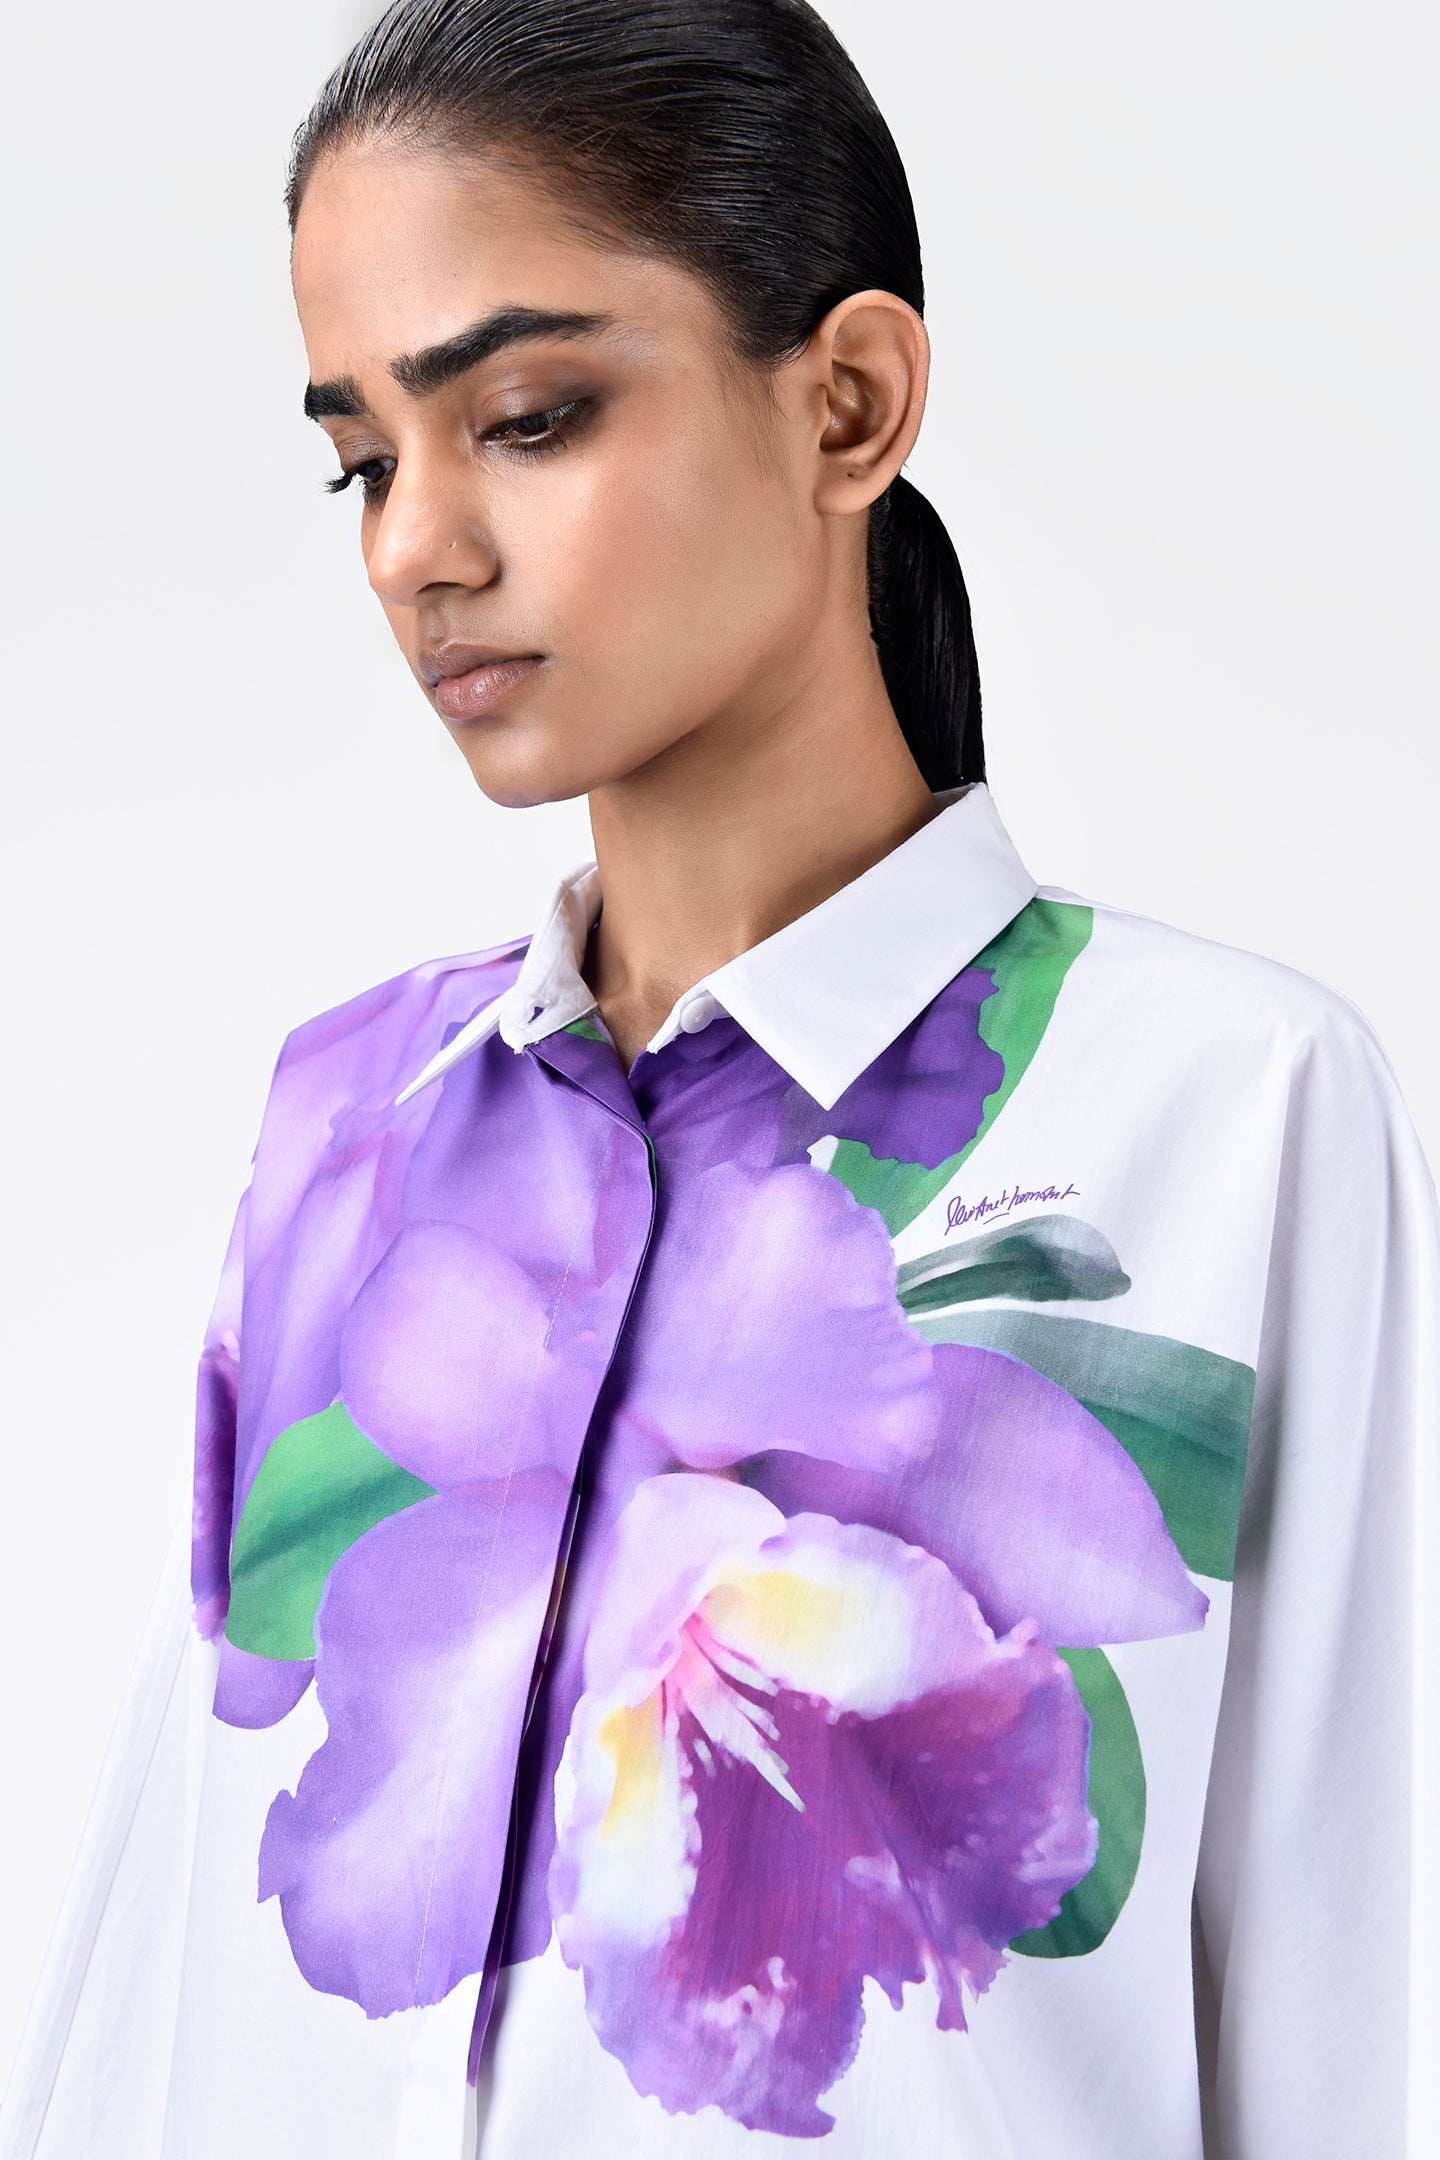 Floral Printed Oversized Shirt